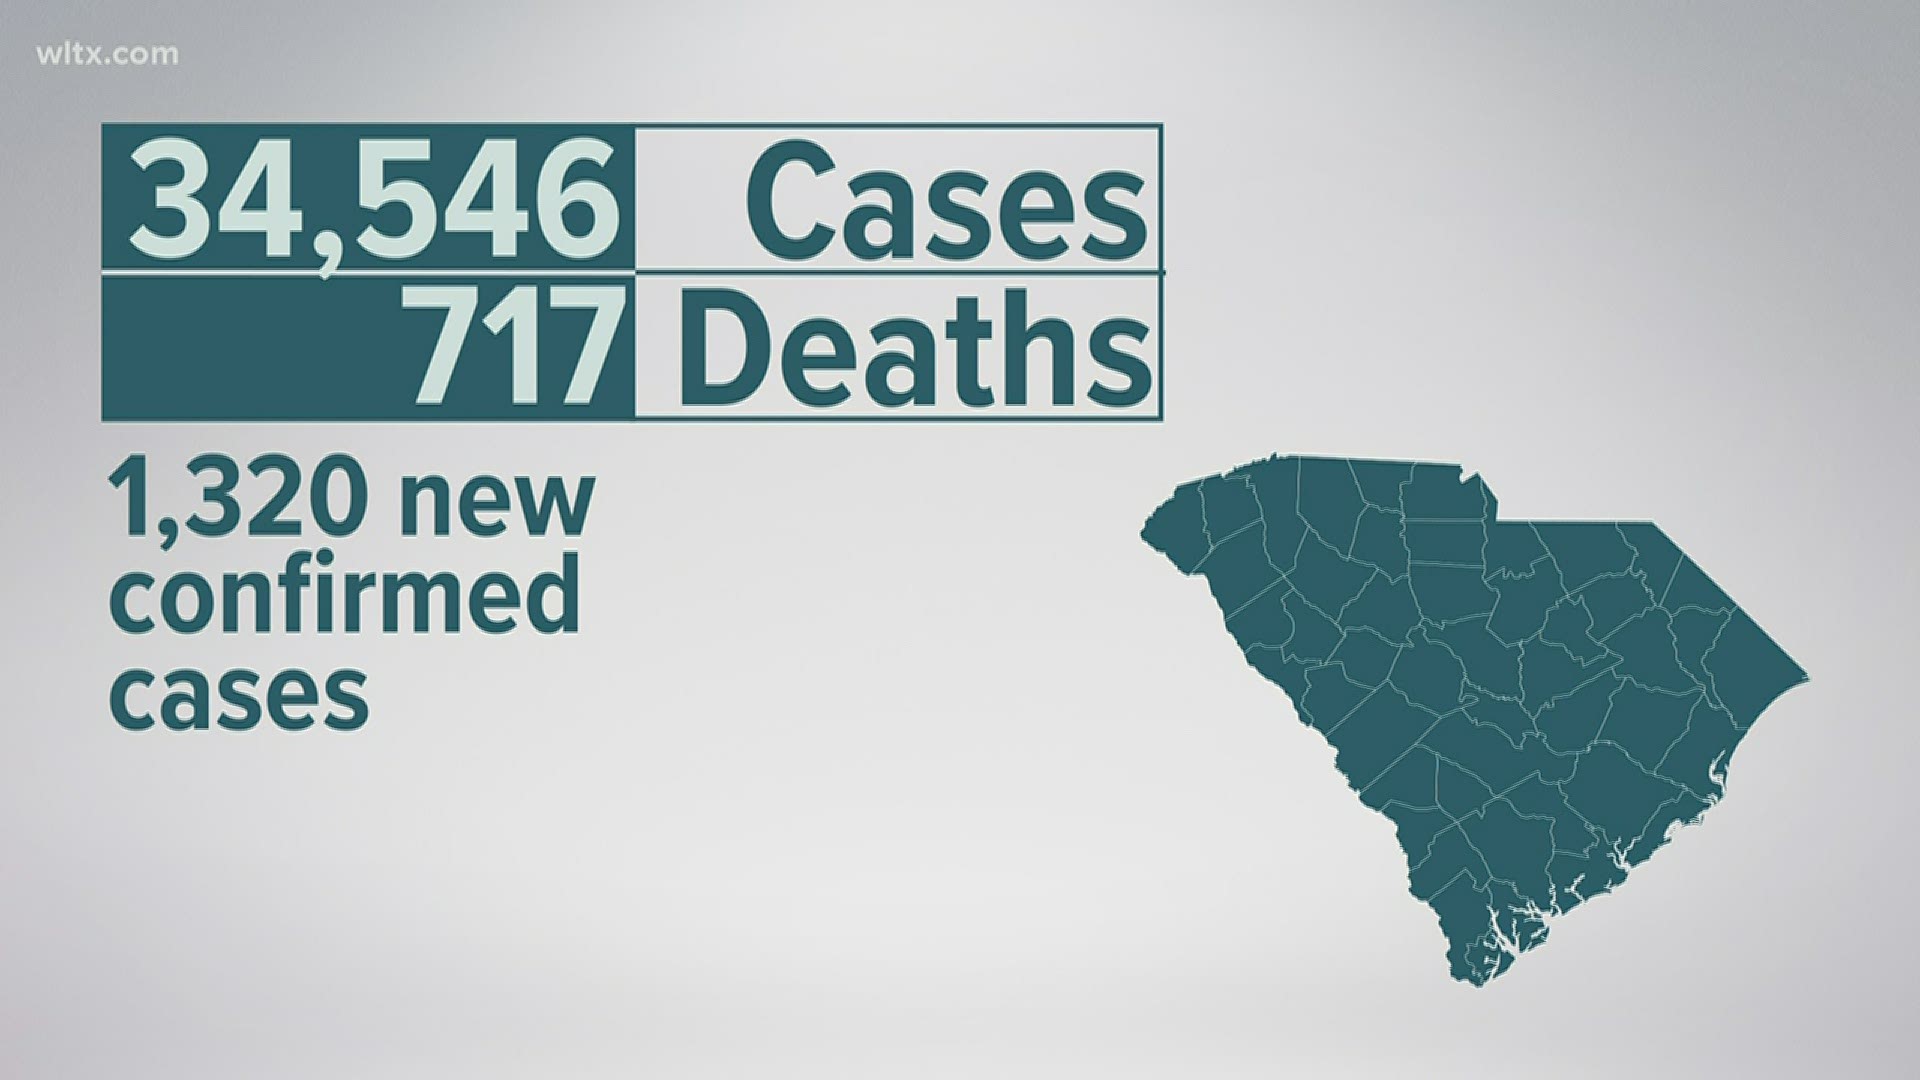 This brings the total number of confirmed cases to 34,546 probable cases to 98, confirmed deaths to 717, and 3 probable deaths